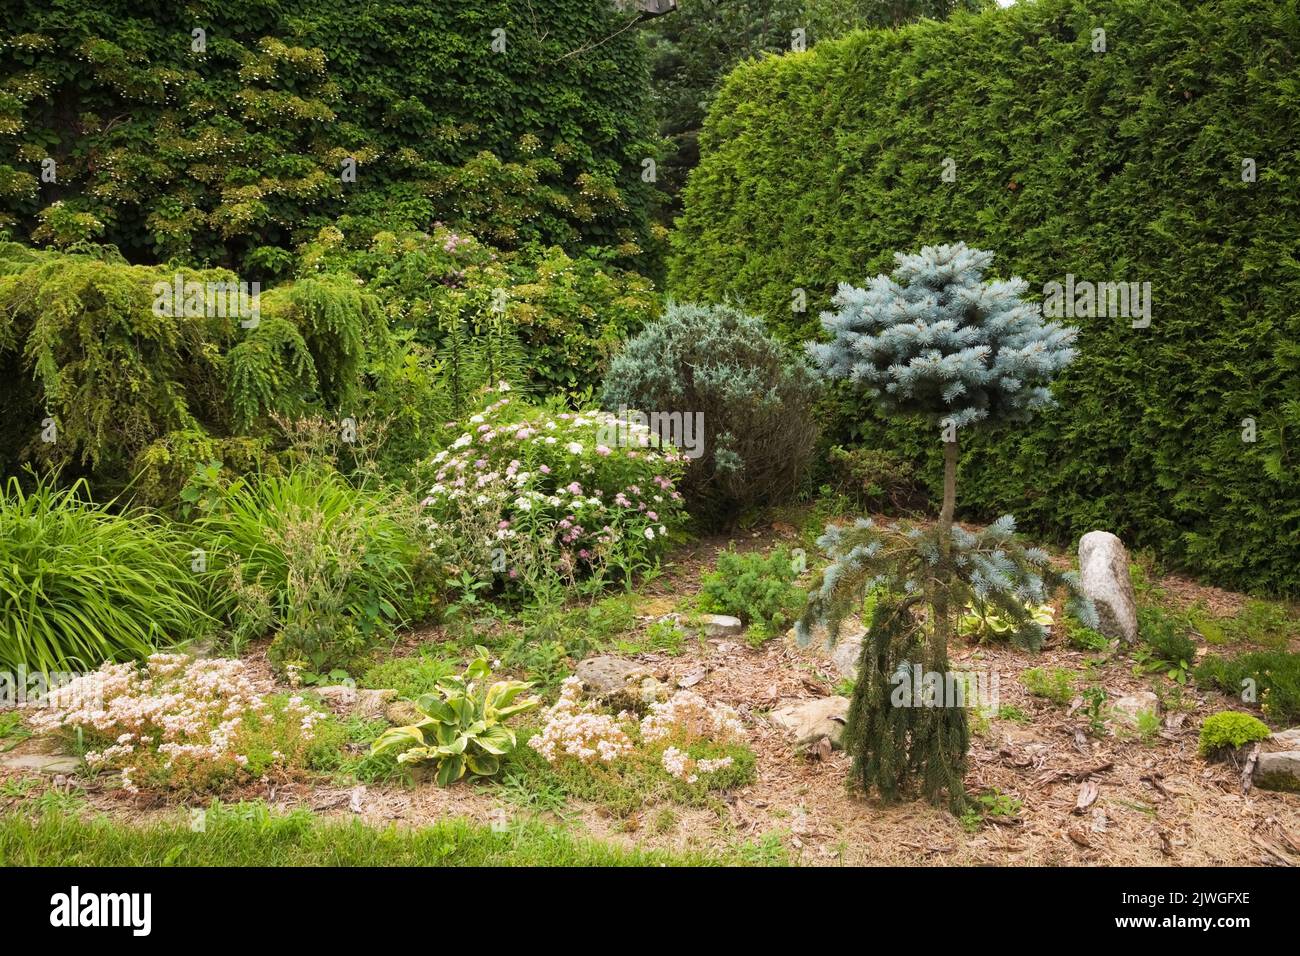 Garden border with assorted shrubs, trees, perennial flowers and Thuja occidentalis - Cedar tree hedge in summer. Stock Photo